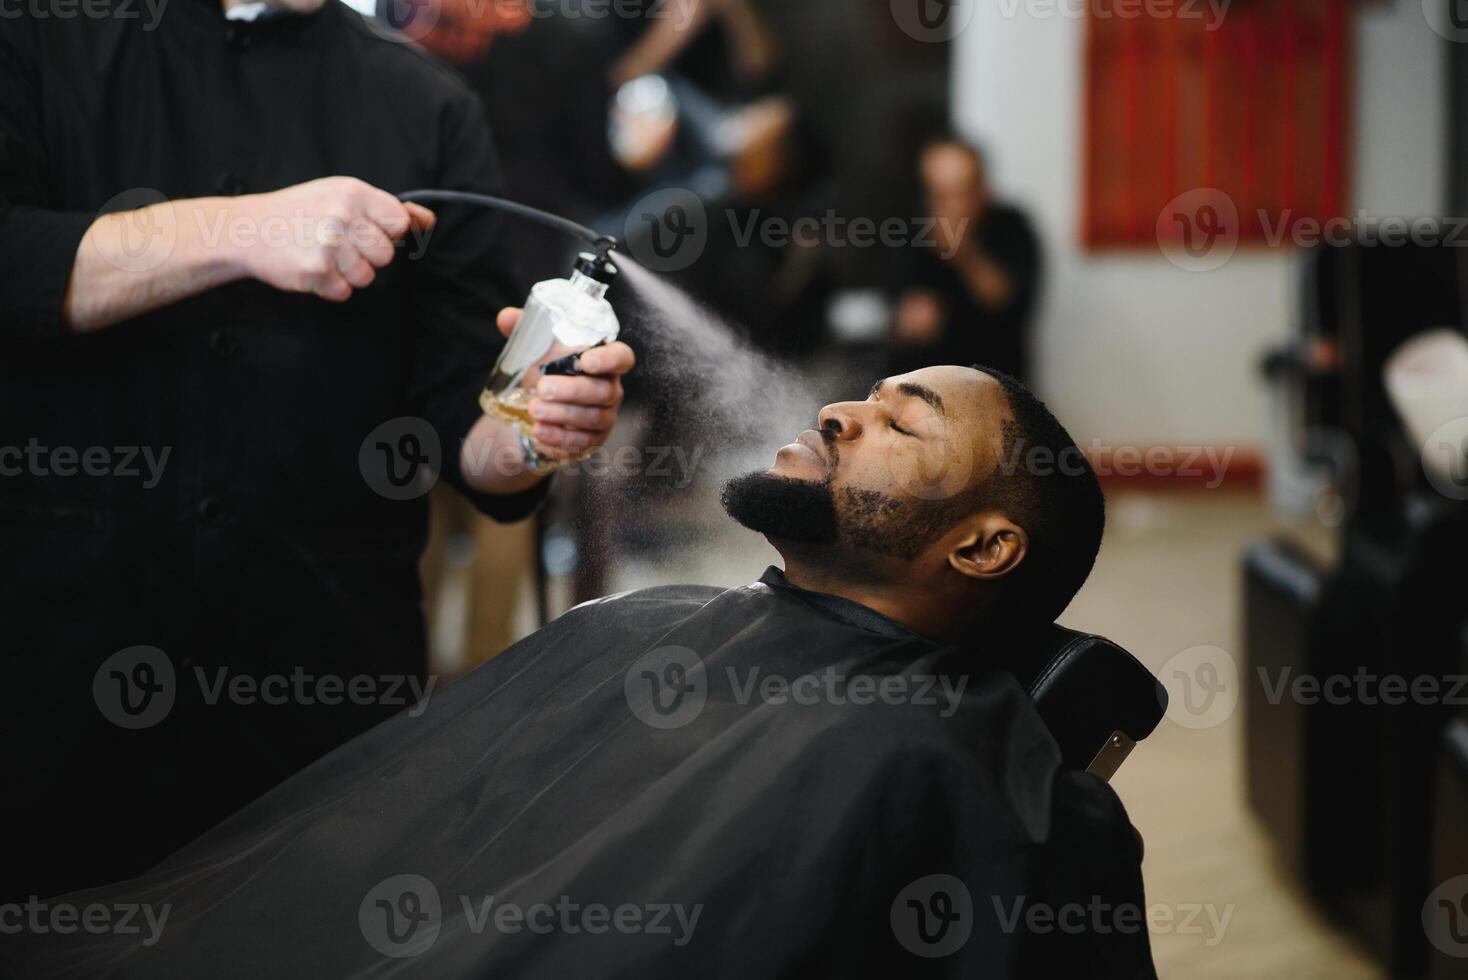 African male client getting haircut at barber shop from professional hairstylist. photo